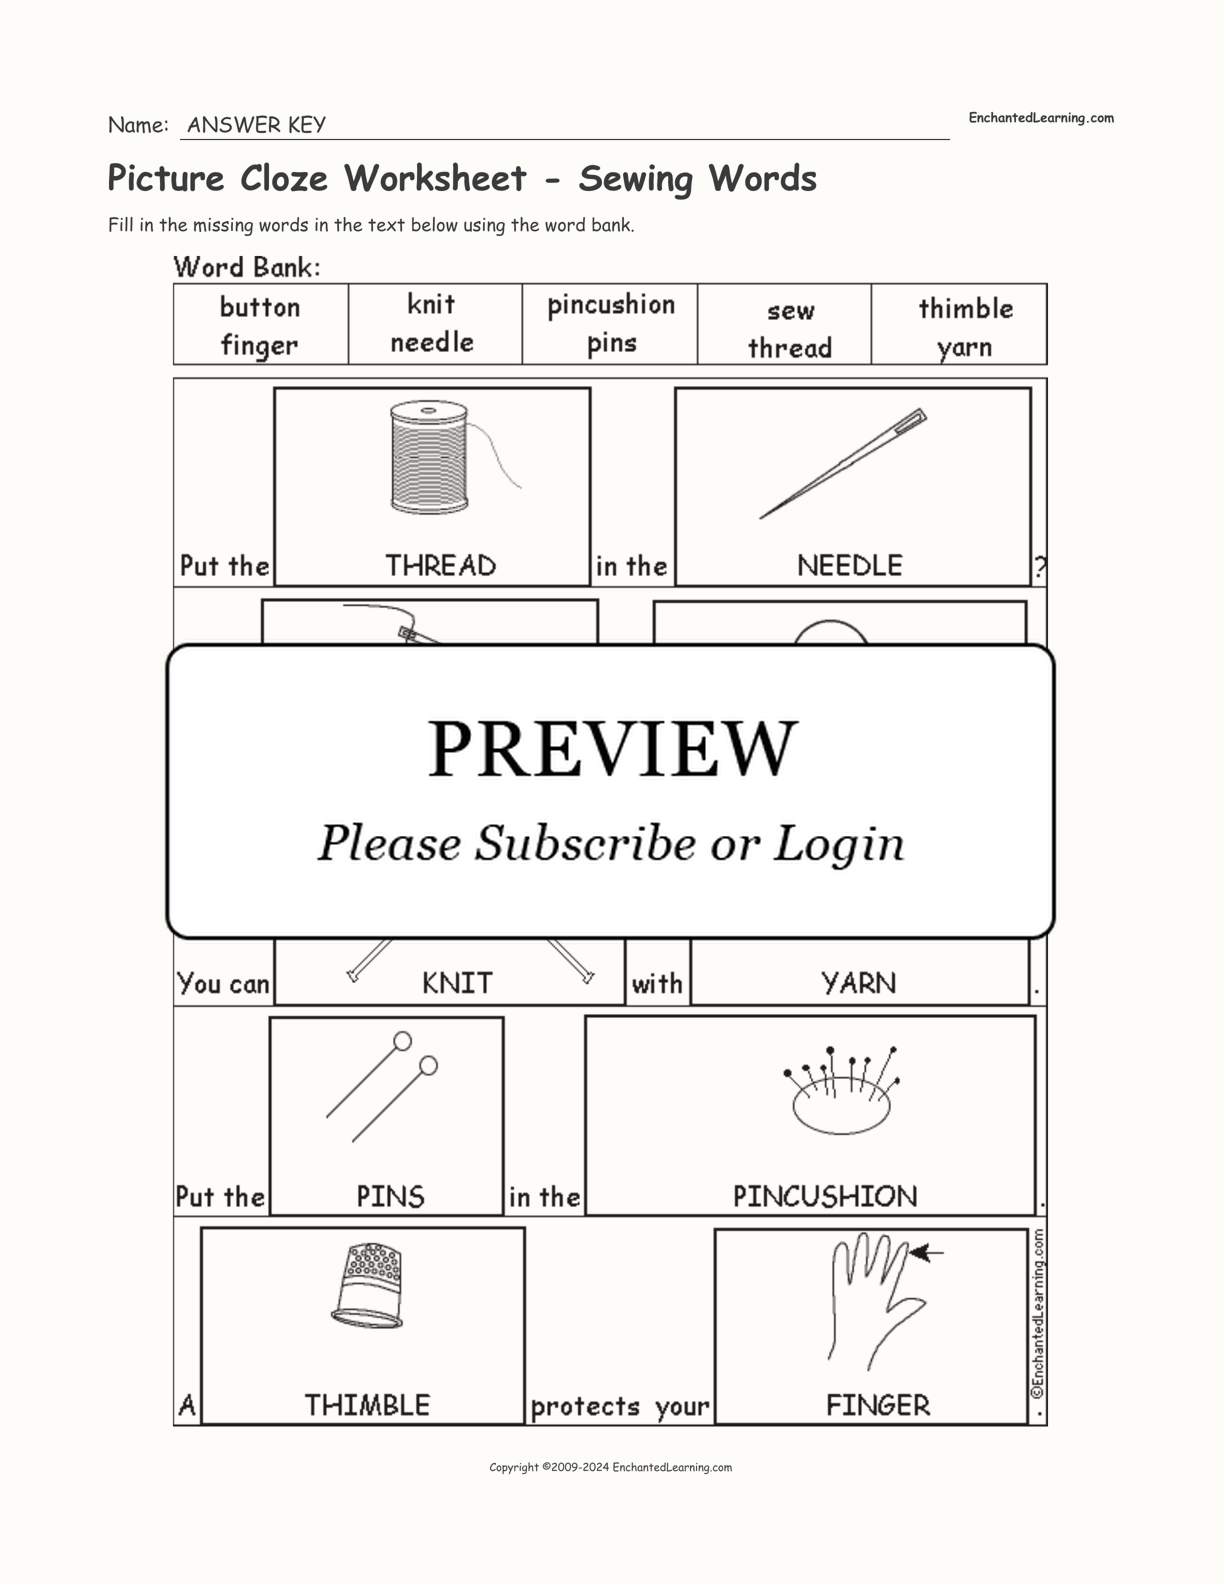 Picture Cloze Worksheet - Sewing Words interactive worksheet page 2